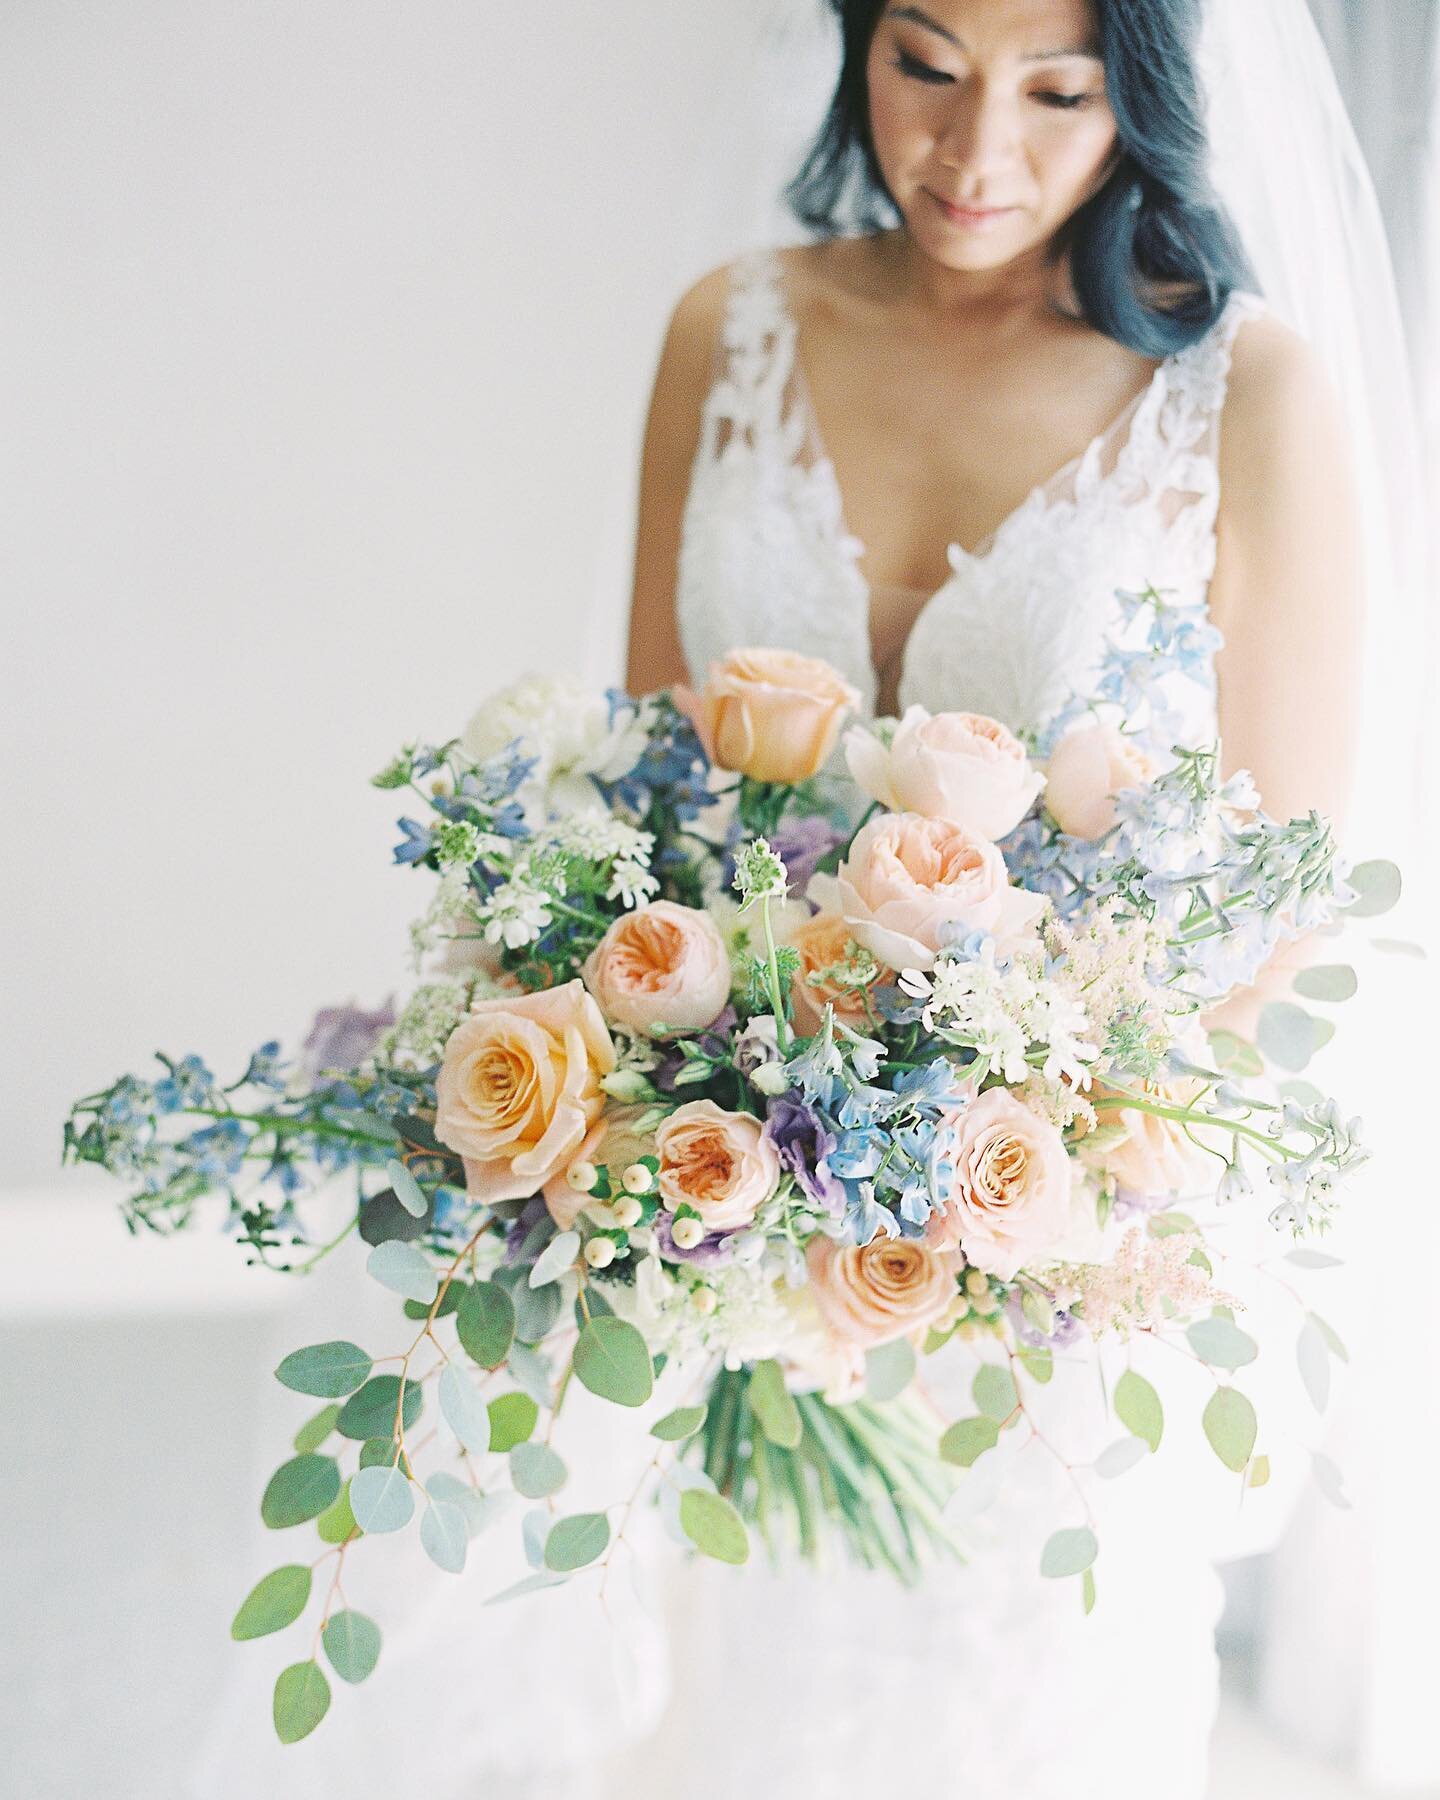 This lavish bouquet in coral, pale blue and lavender hues just might be our new favorite color combo. 
Floral: @festivestl 
Planning: @kateandcompany 
Photo: @clarypfeiffer 
Venue: @ritzcarltonstlouis 
Beauty: @daniellestyle 
Ceremony music: @contemp